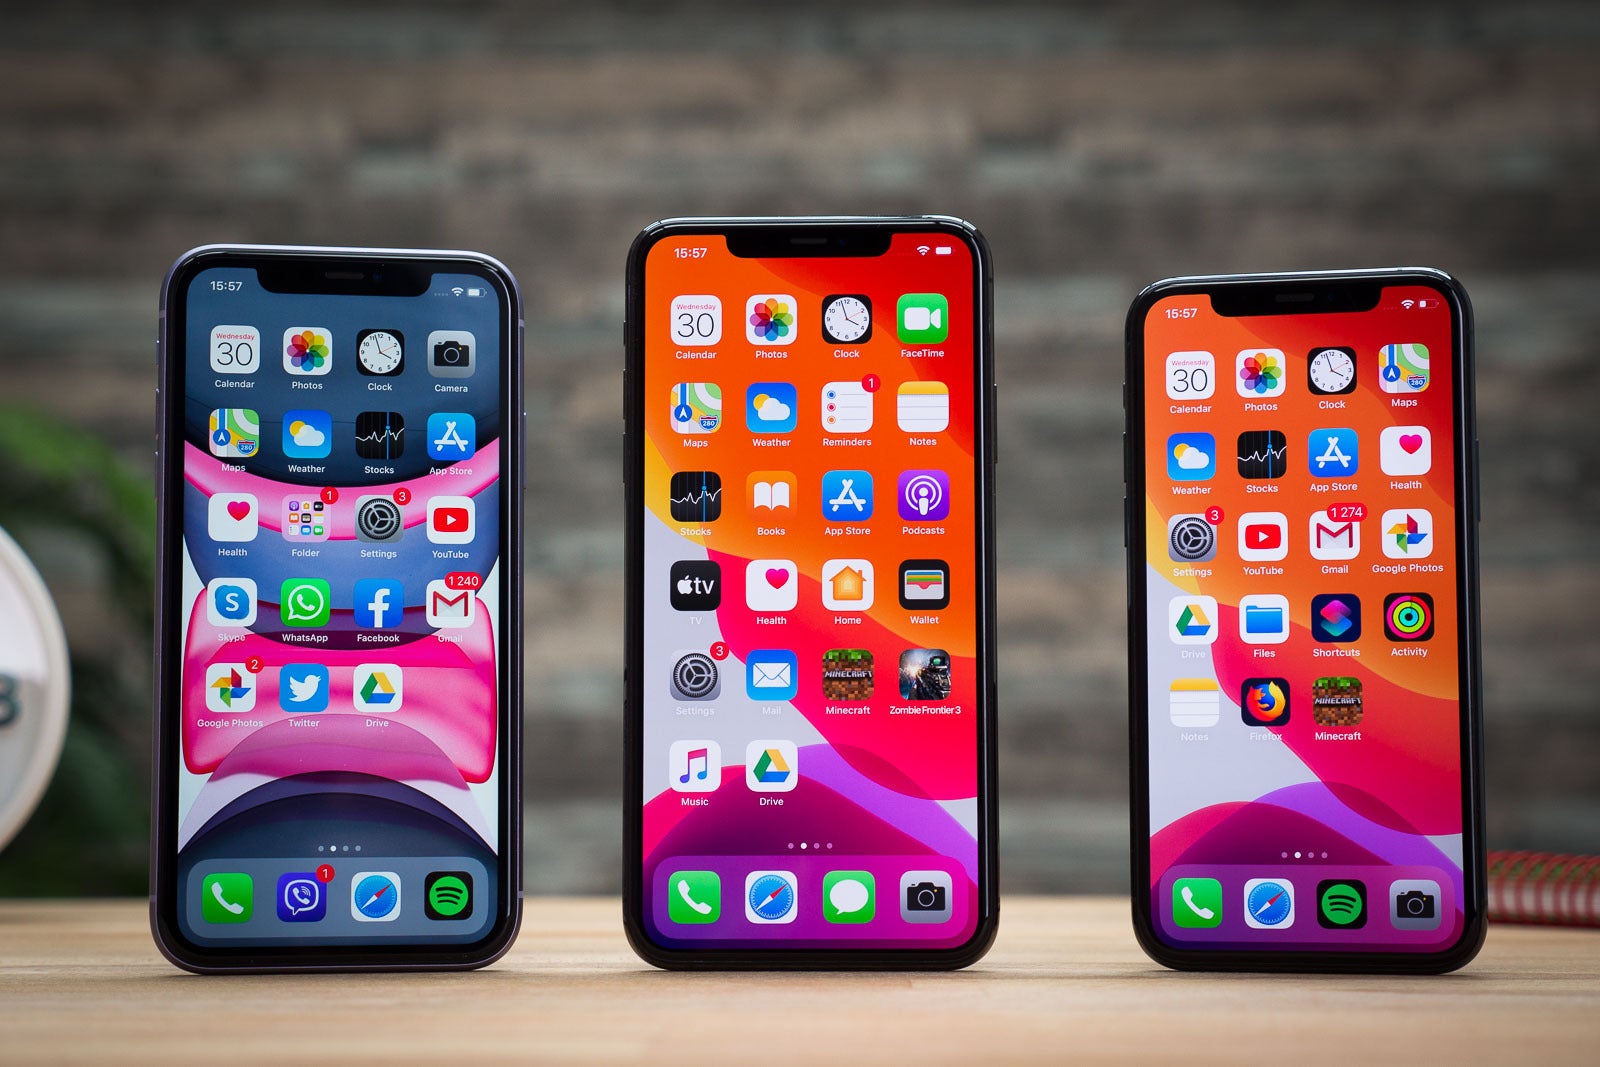 The iPhone 11 and iPhone 11 Pro series - Apple's iPhone shipments declined massively in China last month